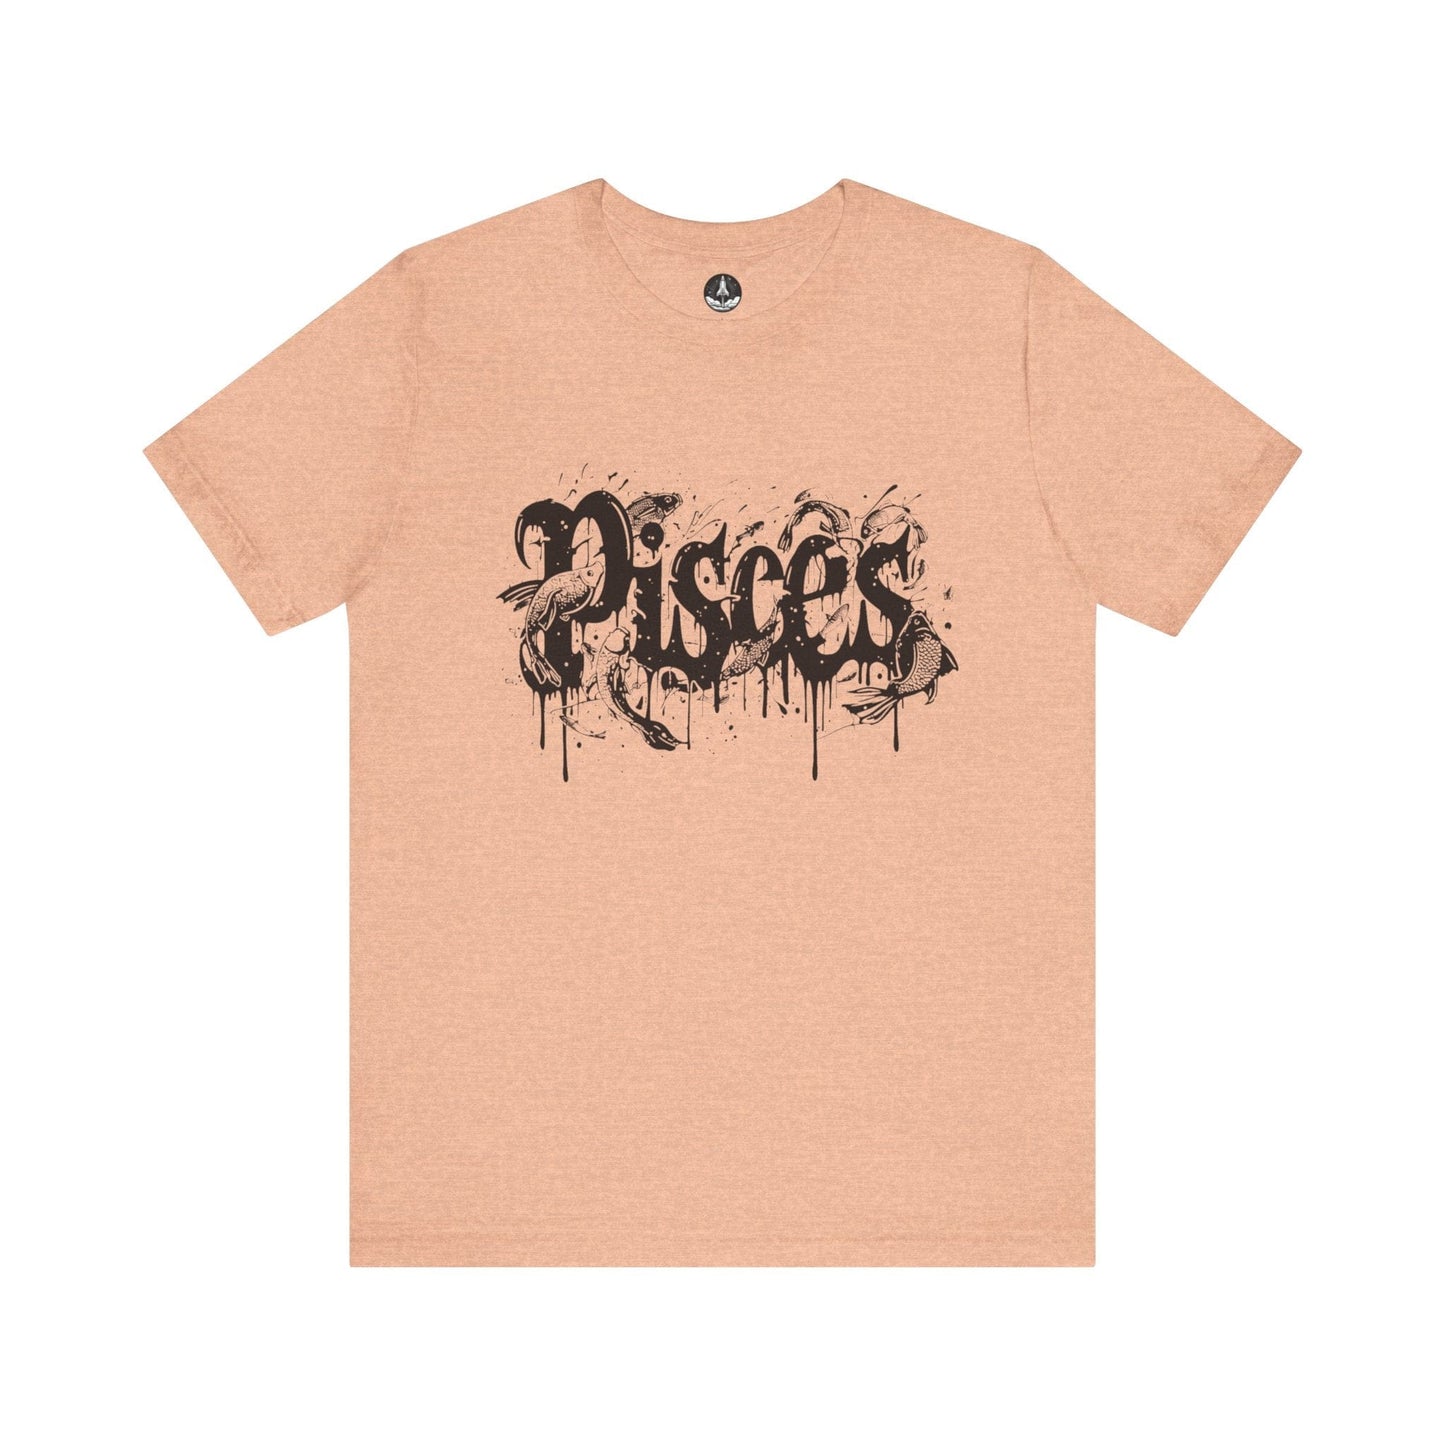 T-Shirt Heather Peach / S Deep Dive Pisces TShirt: Immerse in the Artistic Tide